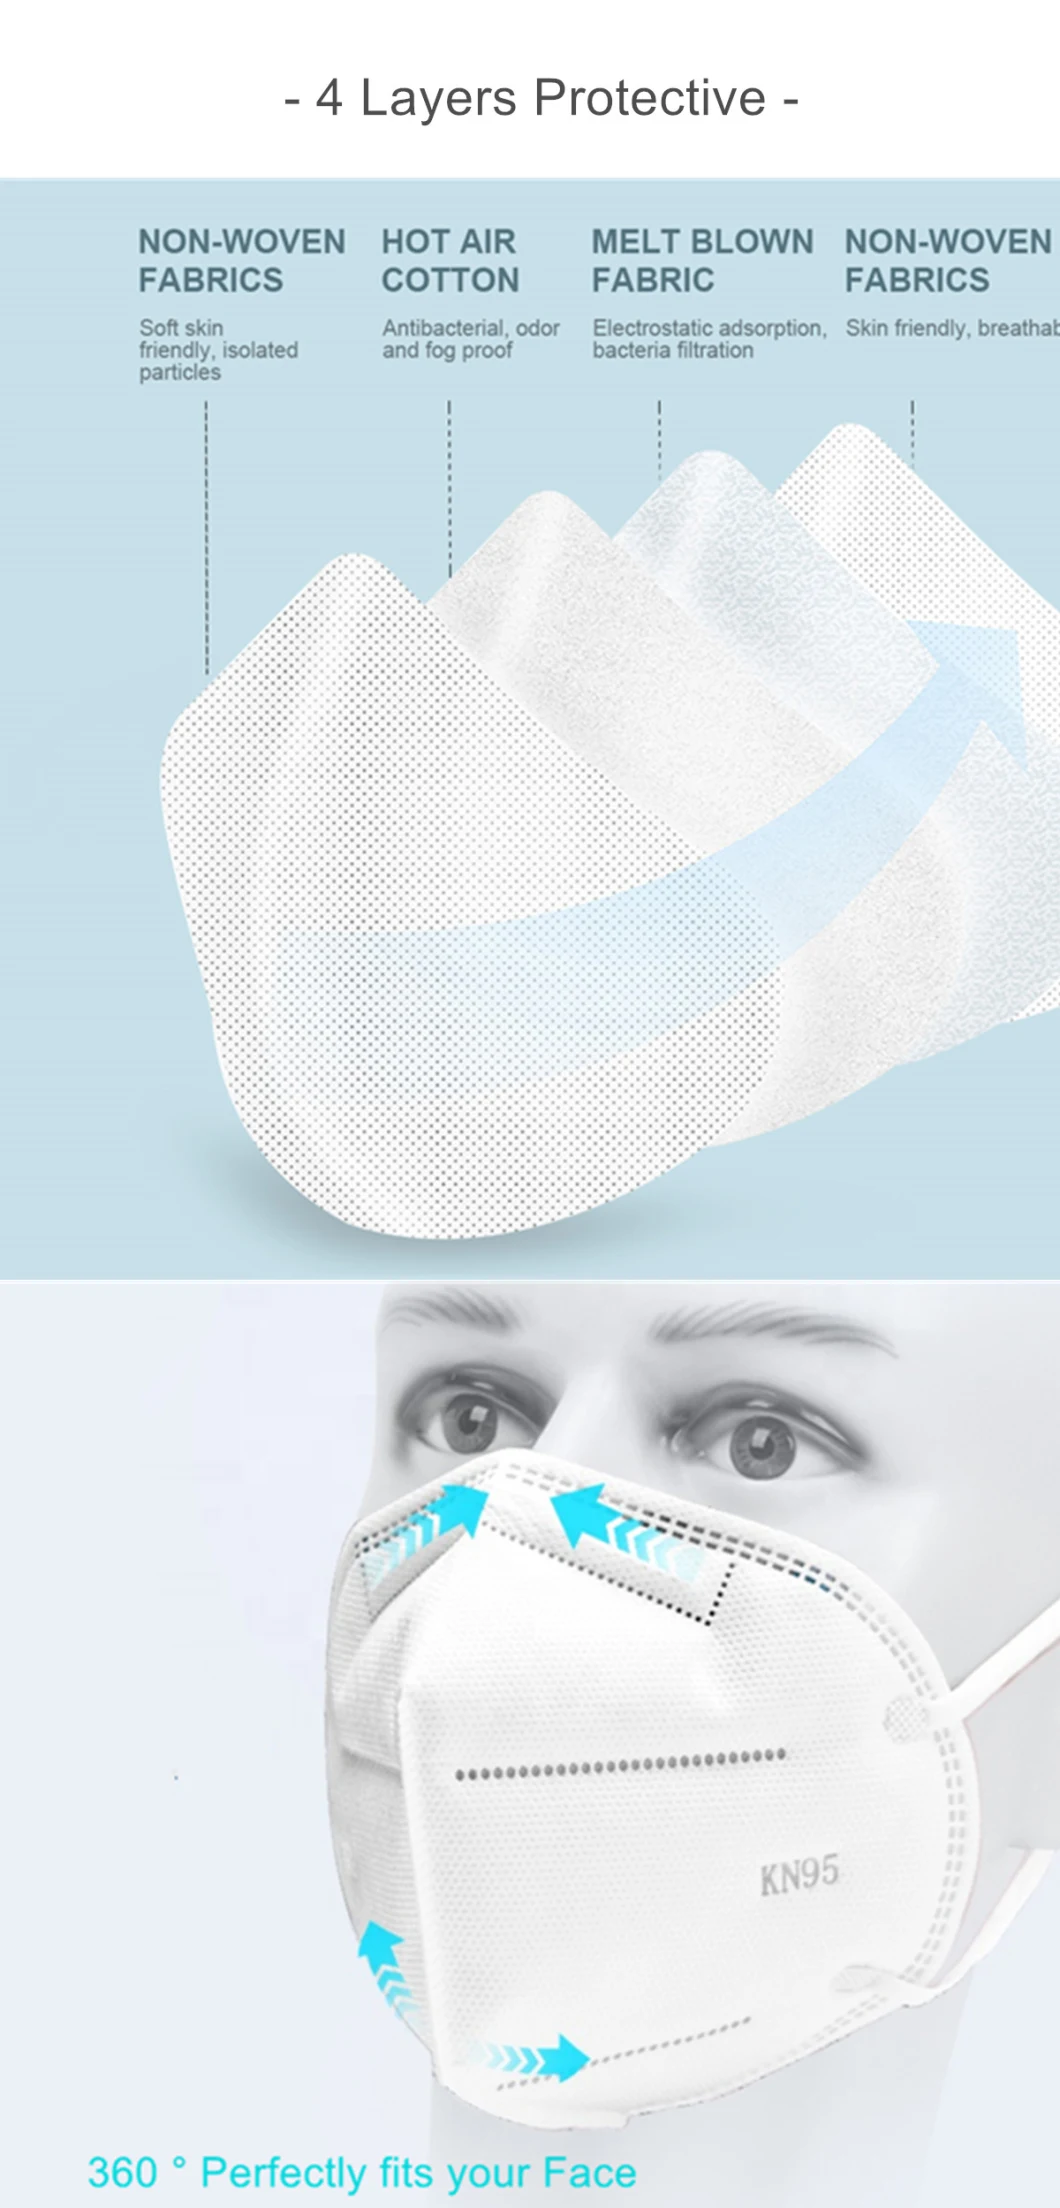 5 Layers KN95 Face Mask 95% Meltblown Cloth Filter Anti Pm2.5 Protective Respirator China Standard Safety Mask Disposable Mask KN95 Mask